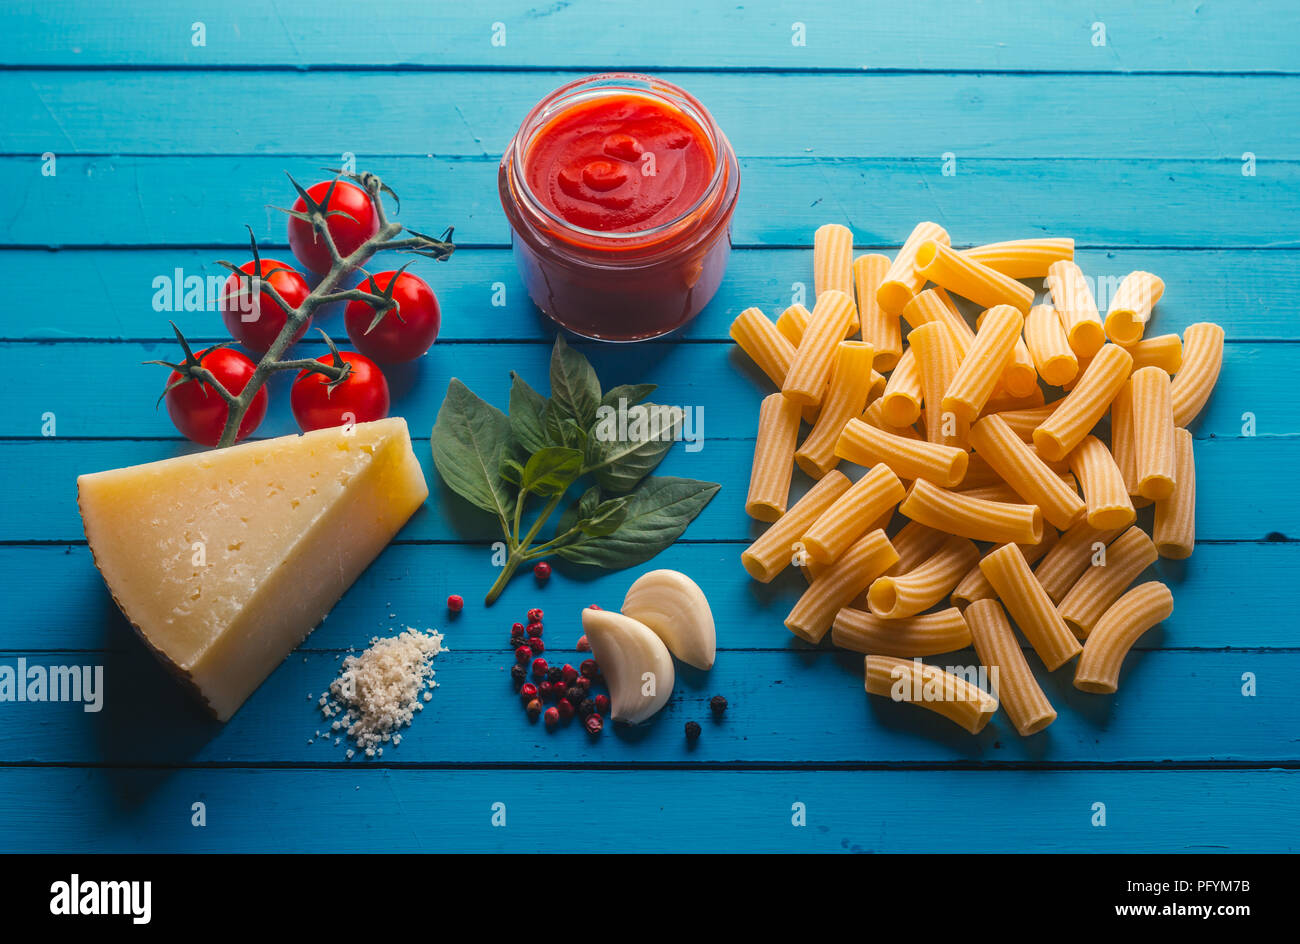 Pasta with various ingredients for cooking Italian food, on a blue table Stock Photo